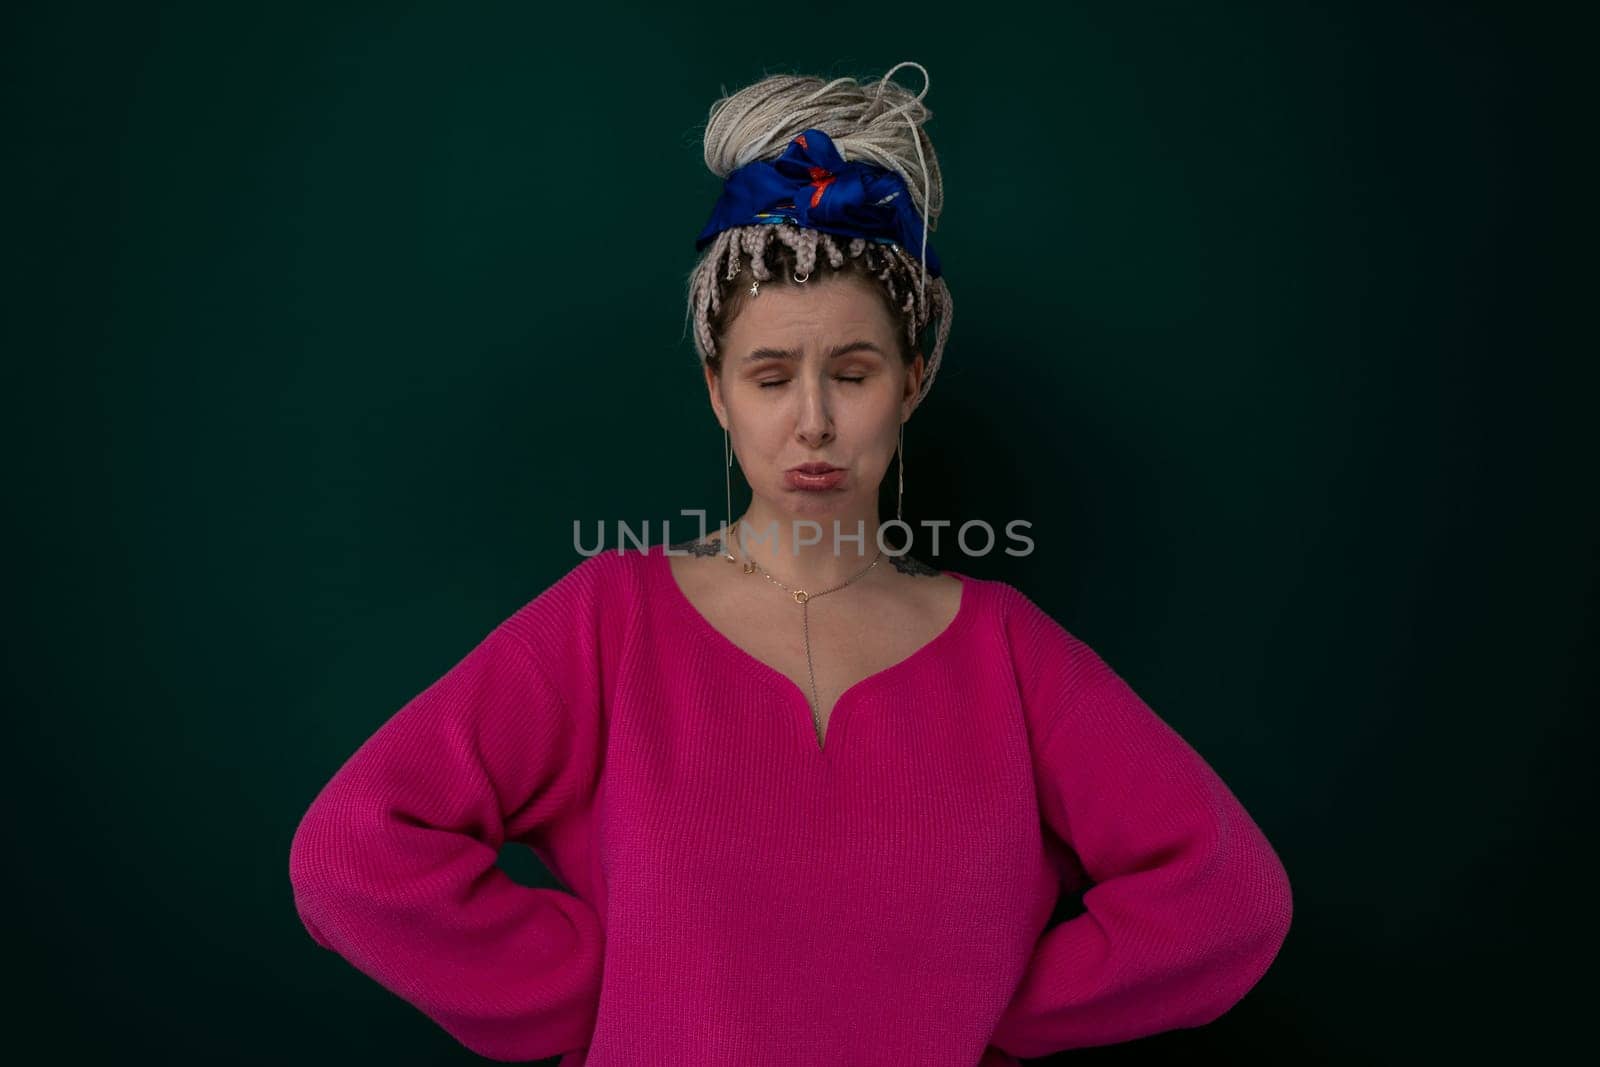 A woman wearing a pink top and a blue bow headband poses for a photo.